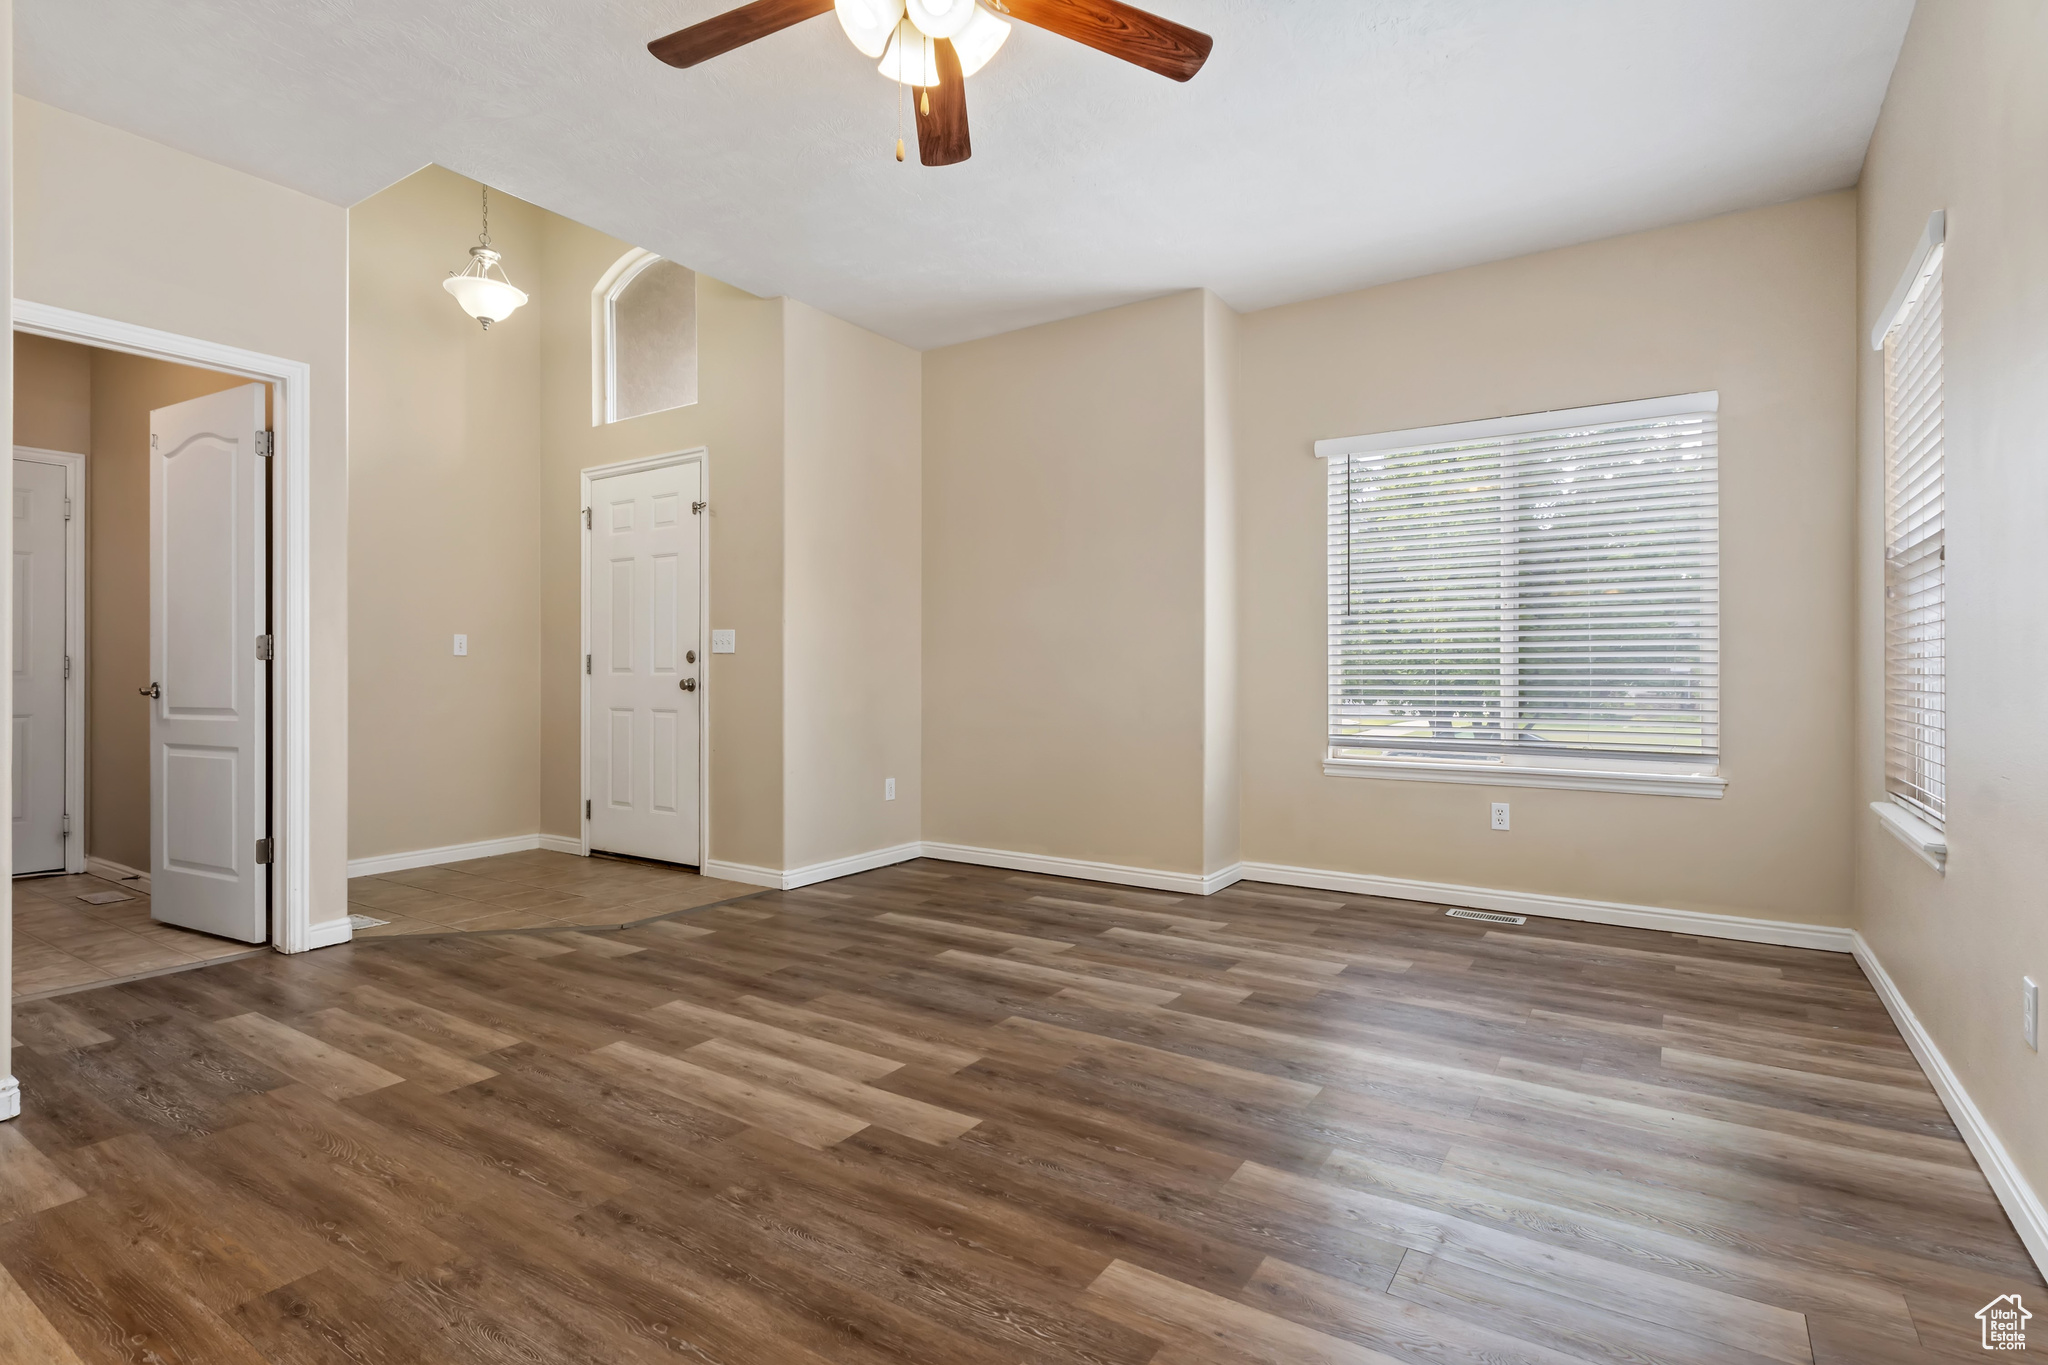 Living room with dark hardwood / wood-style flooring and ceiling fan